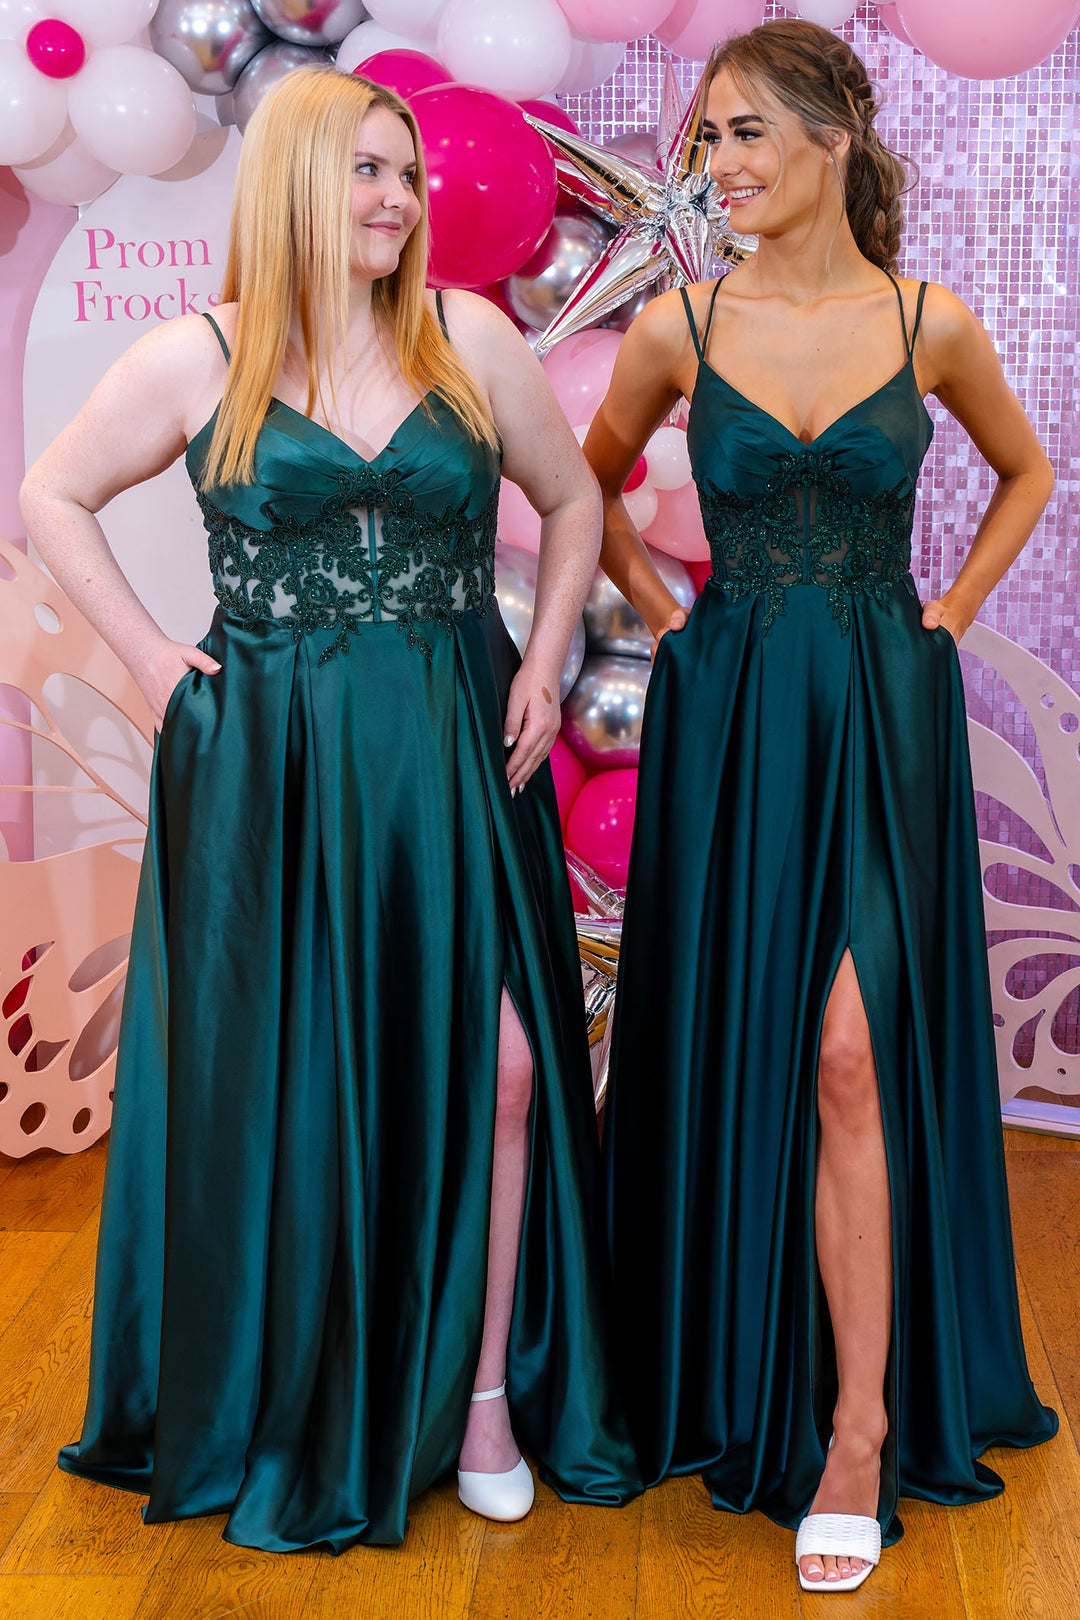 Prom Frocks PF1013 Dark Green Corset Lace Back Prom Dress - Dotique Chesterfield